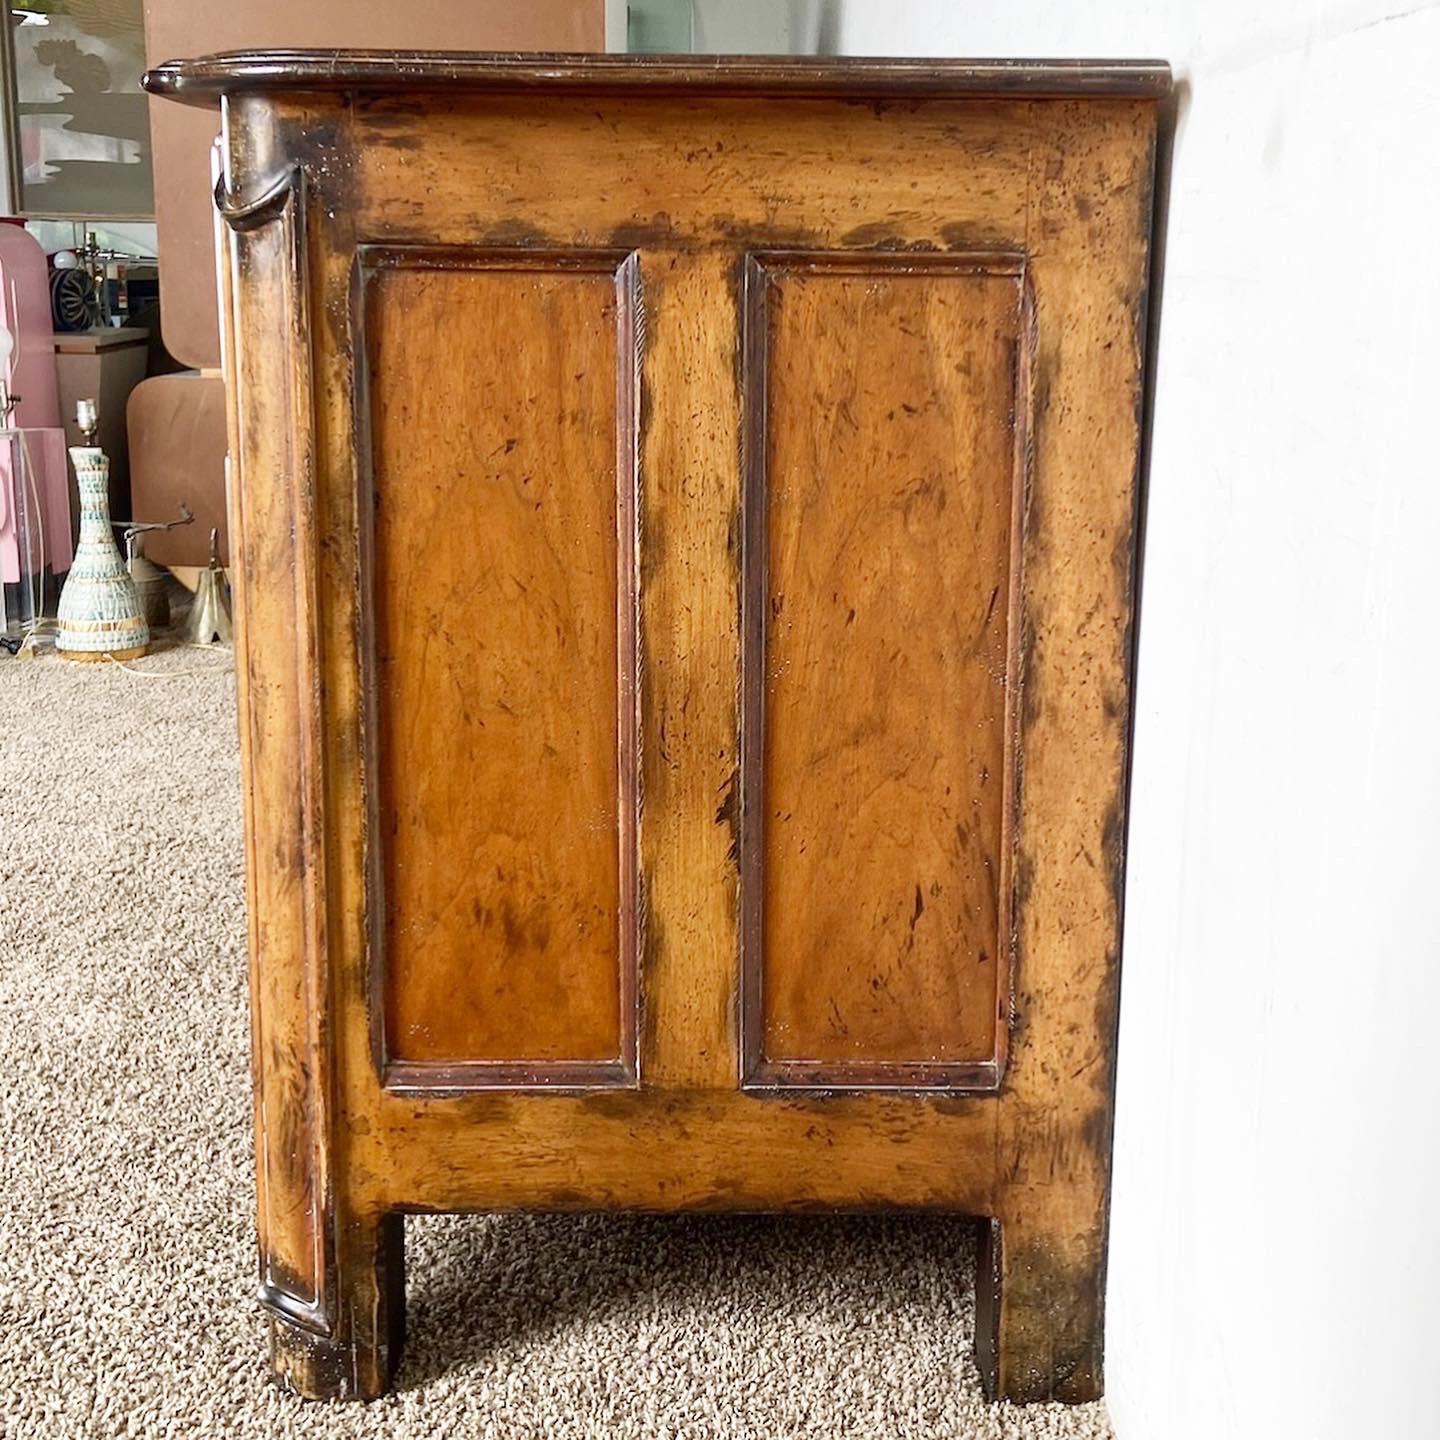 French Provincial Style Wooden Chest of Drawers by Polo Ralph Lauren In Good Condition For Sale In Delray Beach, FL